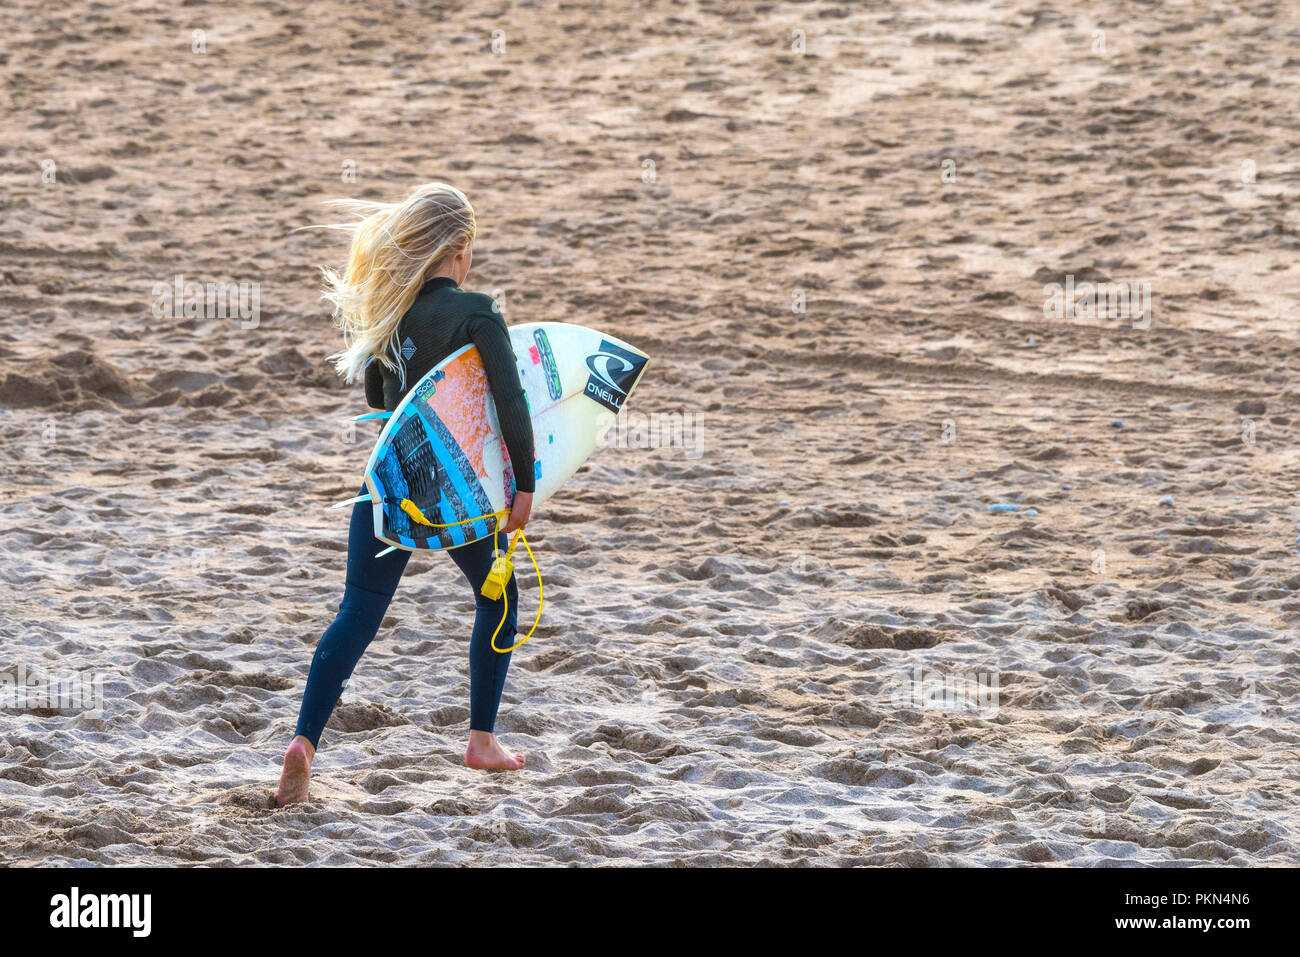 Surfing UK. A young surfer carrying her surfboard and running acros Fistral Beach in Newquay Cornwall. Stock Photo